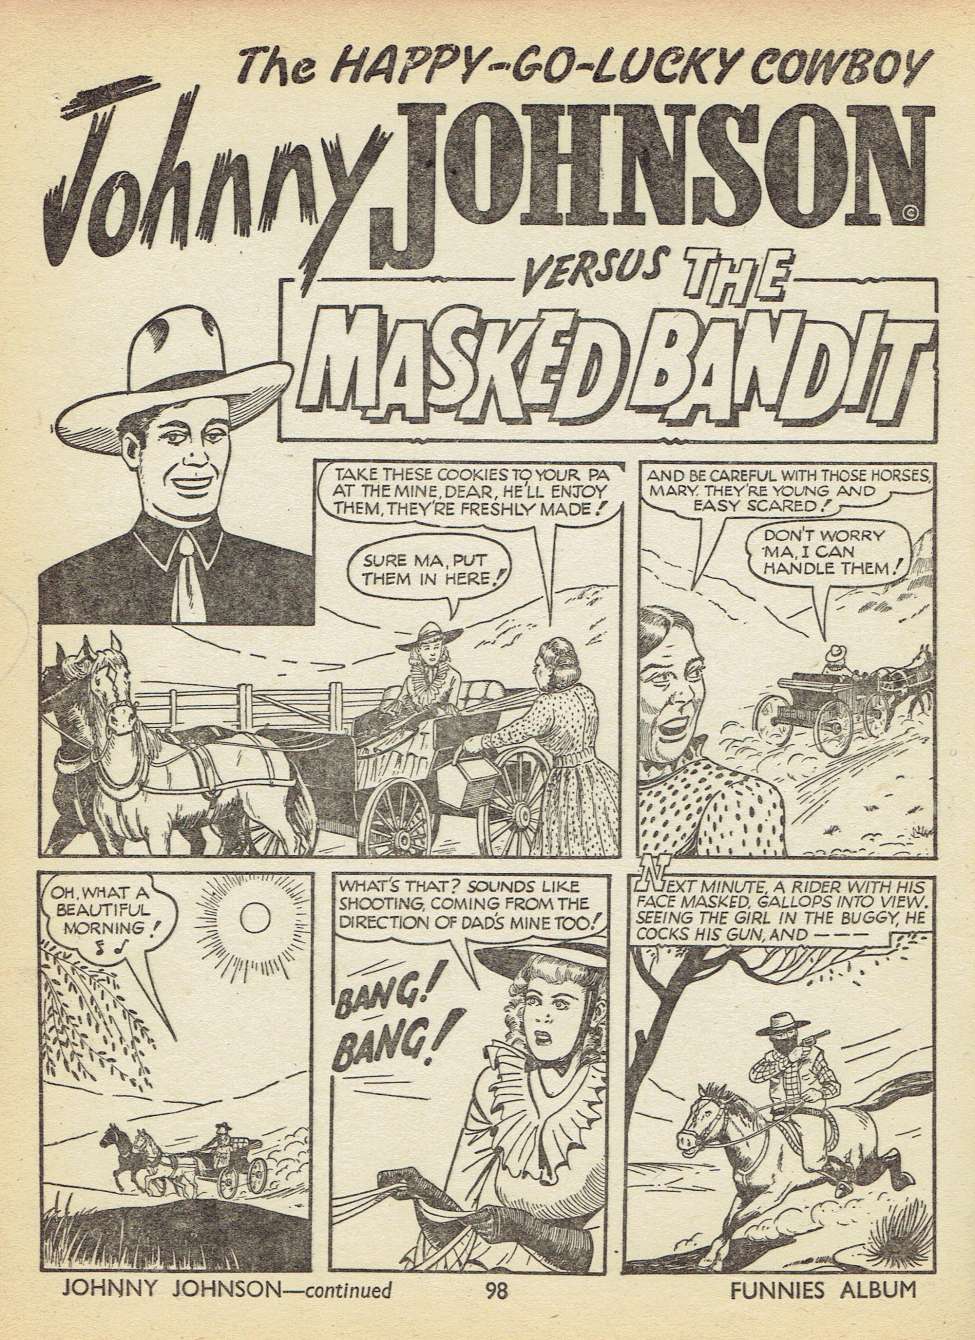 Book Cover For Johnny Johnson the Happy-Go-Lucky Cowboy